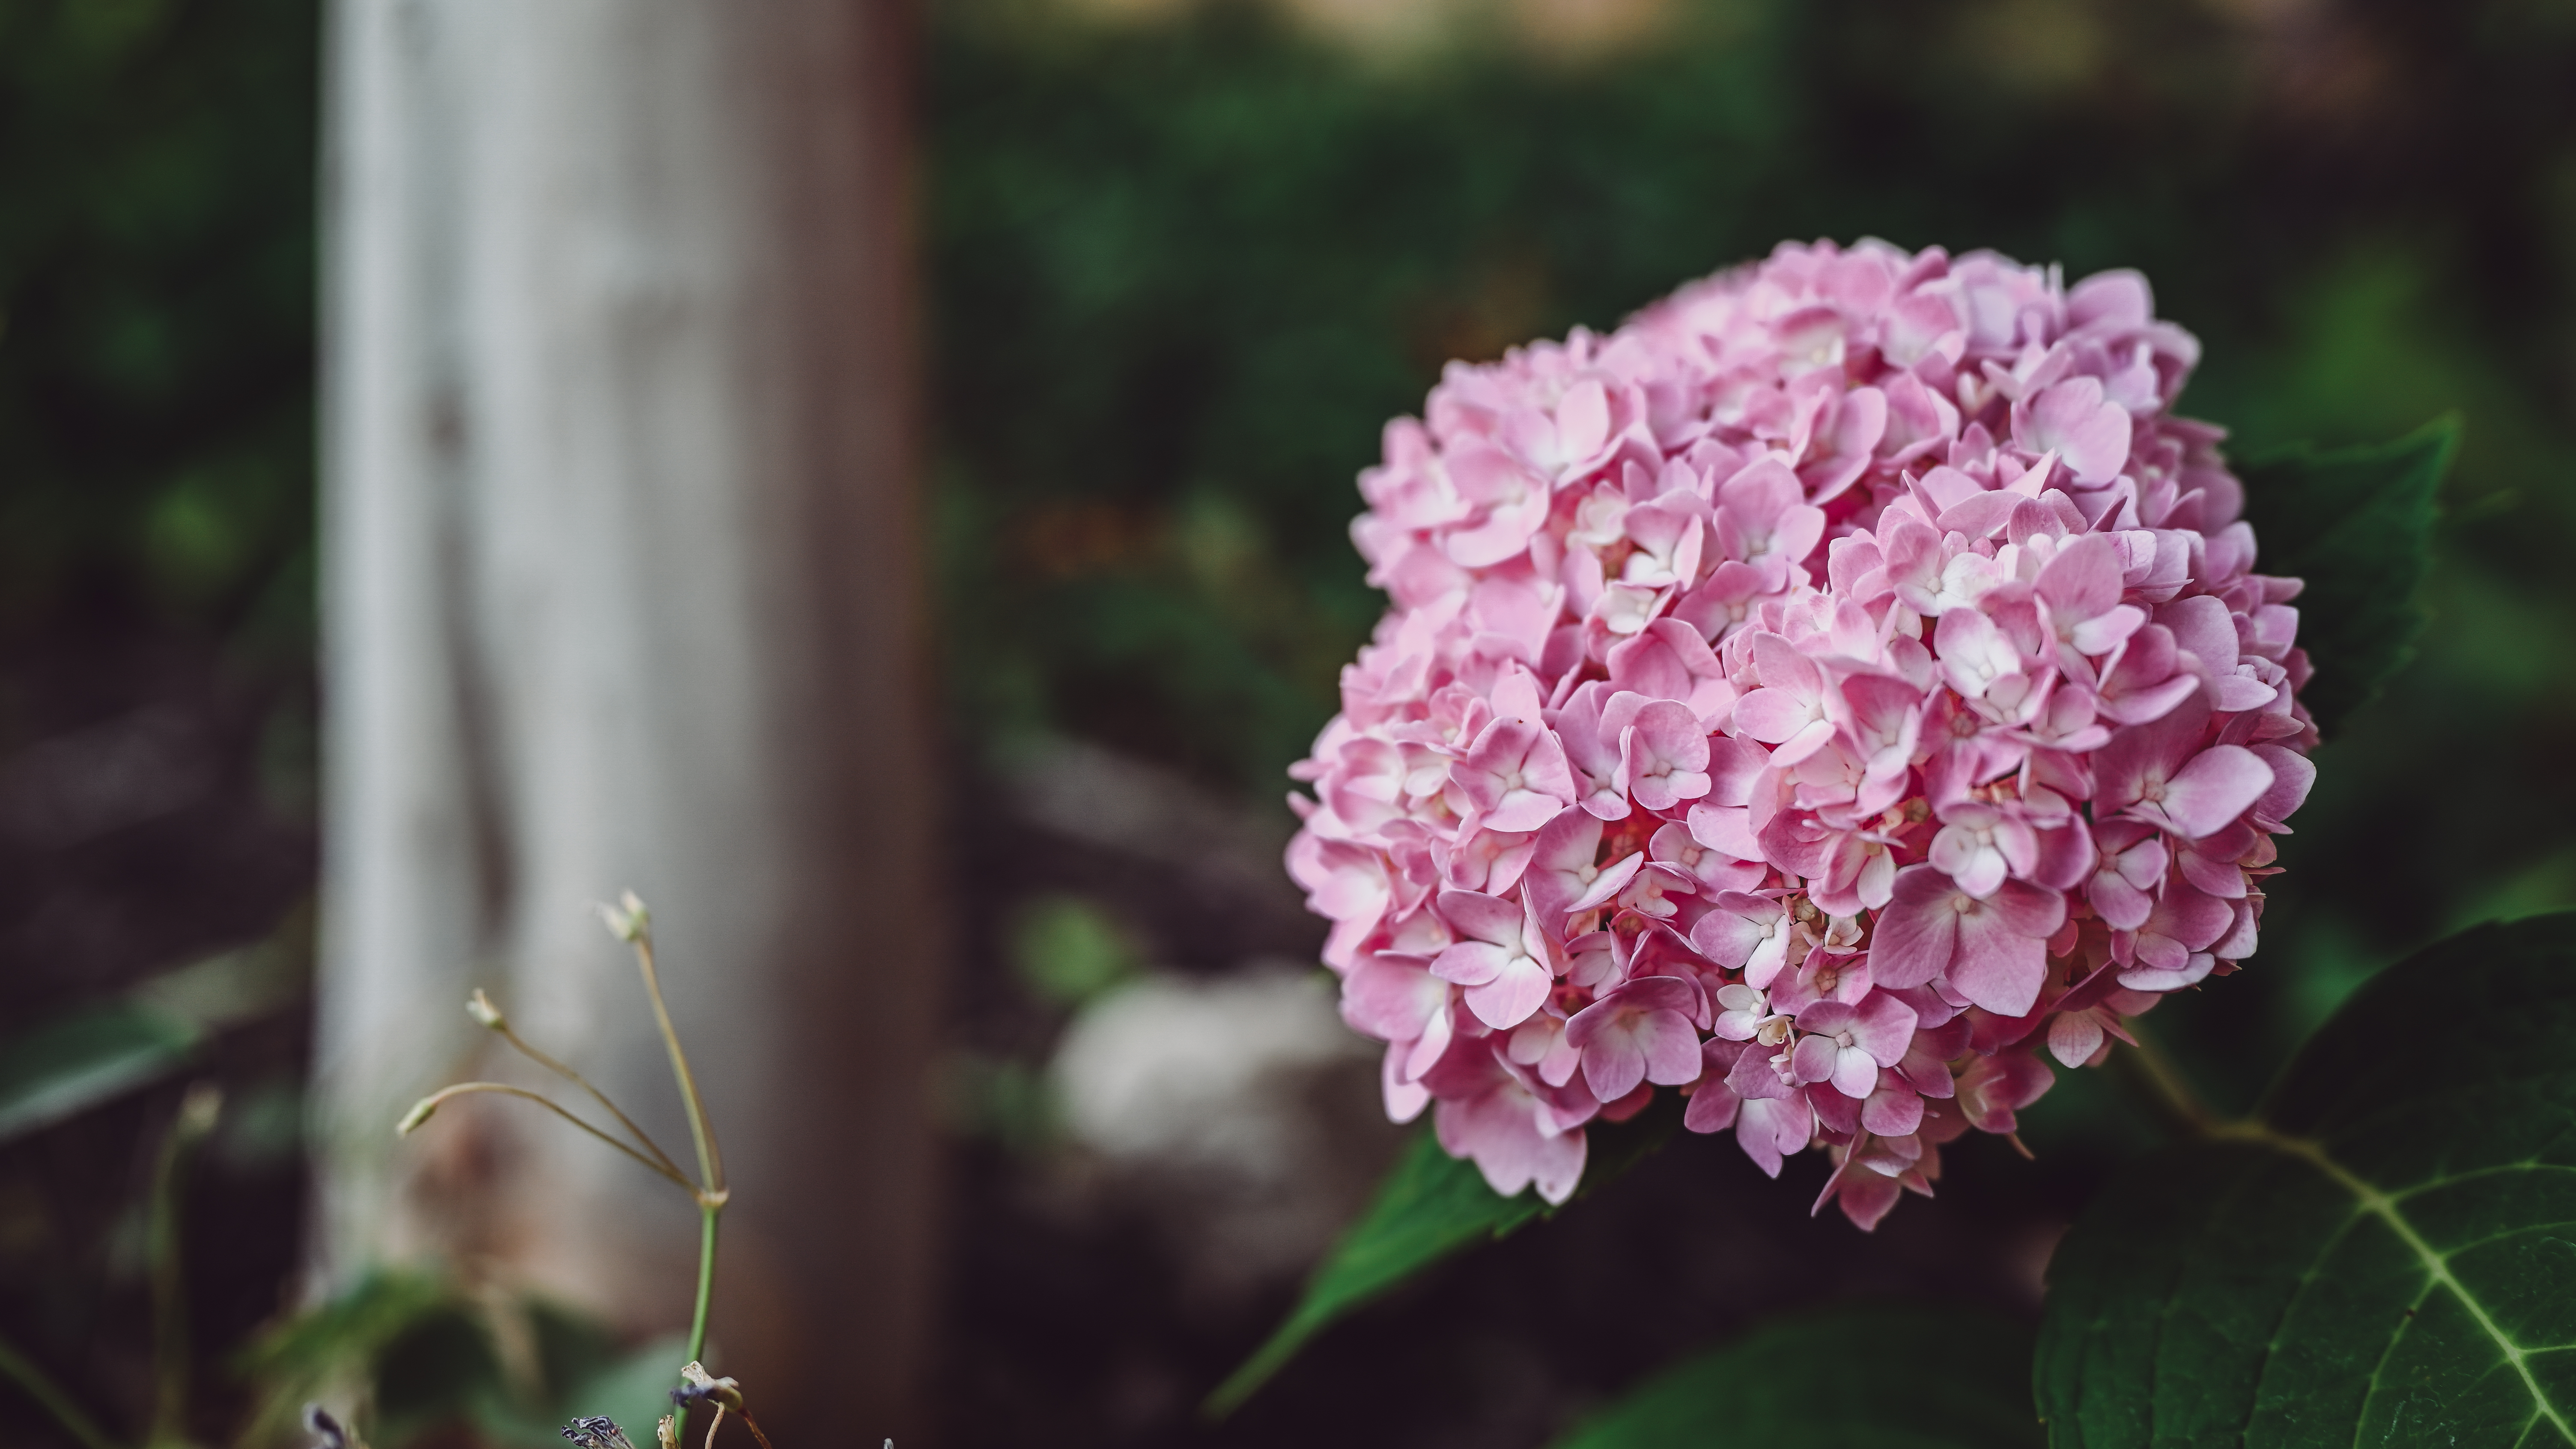 Nature Flowers Photography Pink Flowers Outdoors 55mm 6016x3384